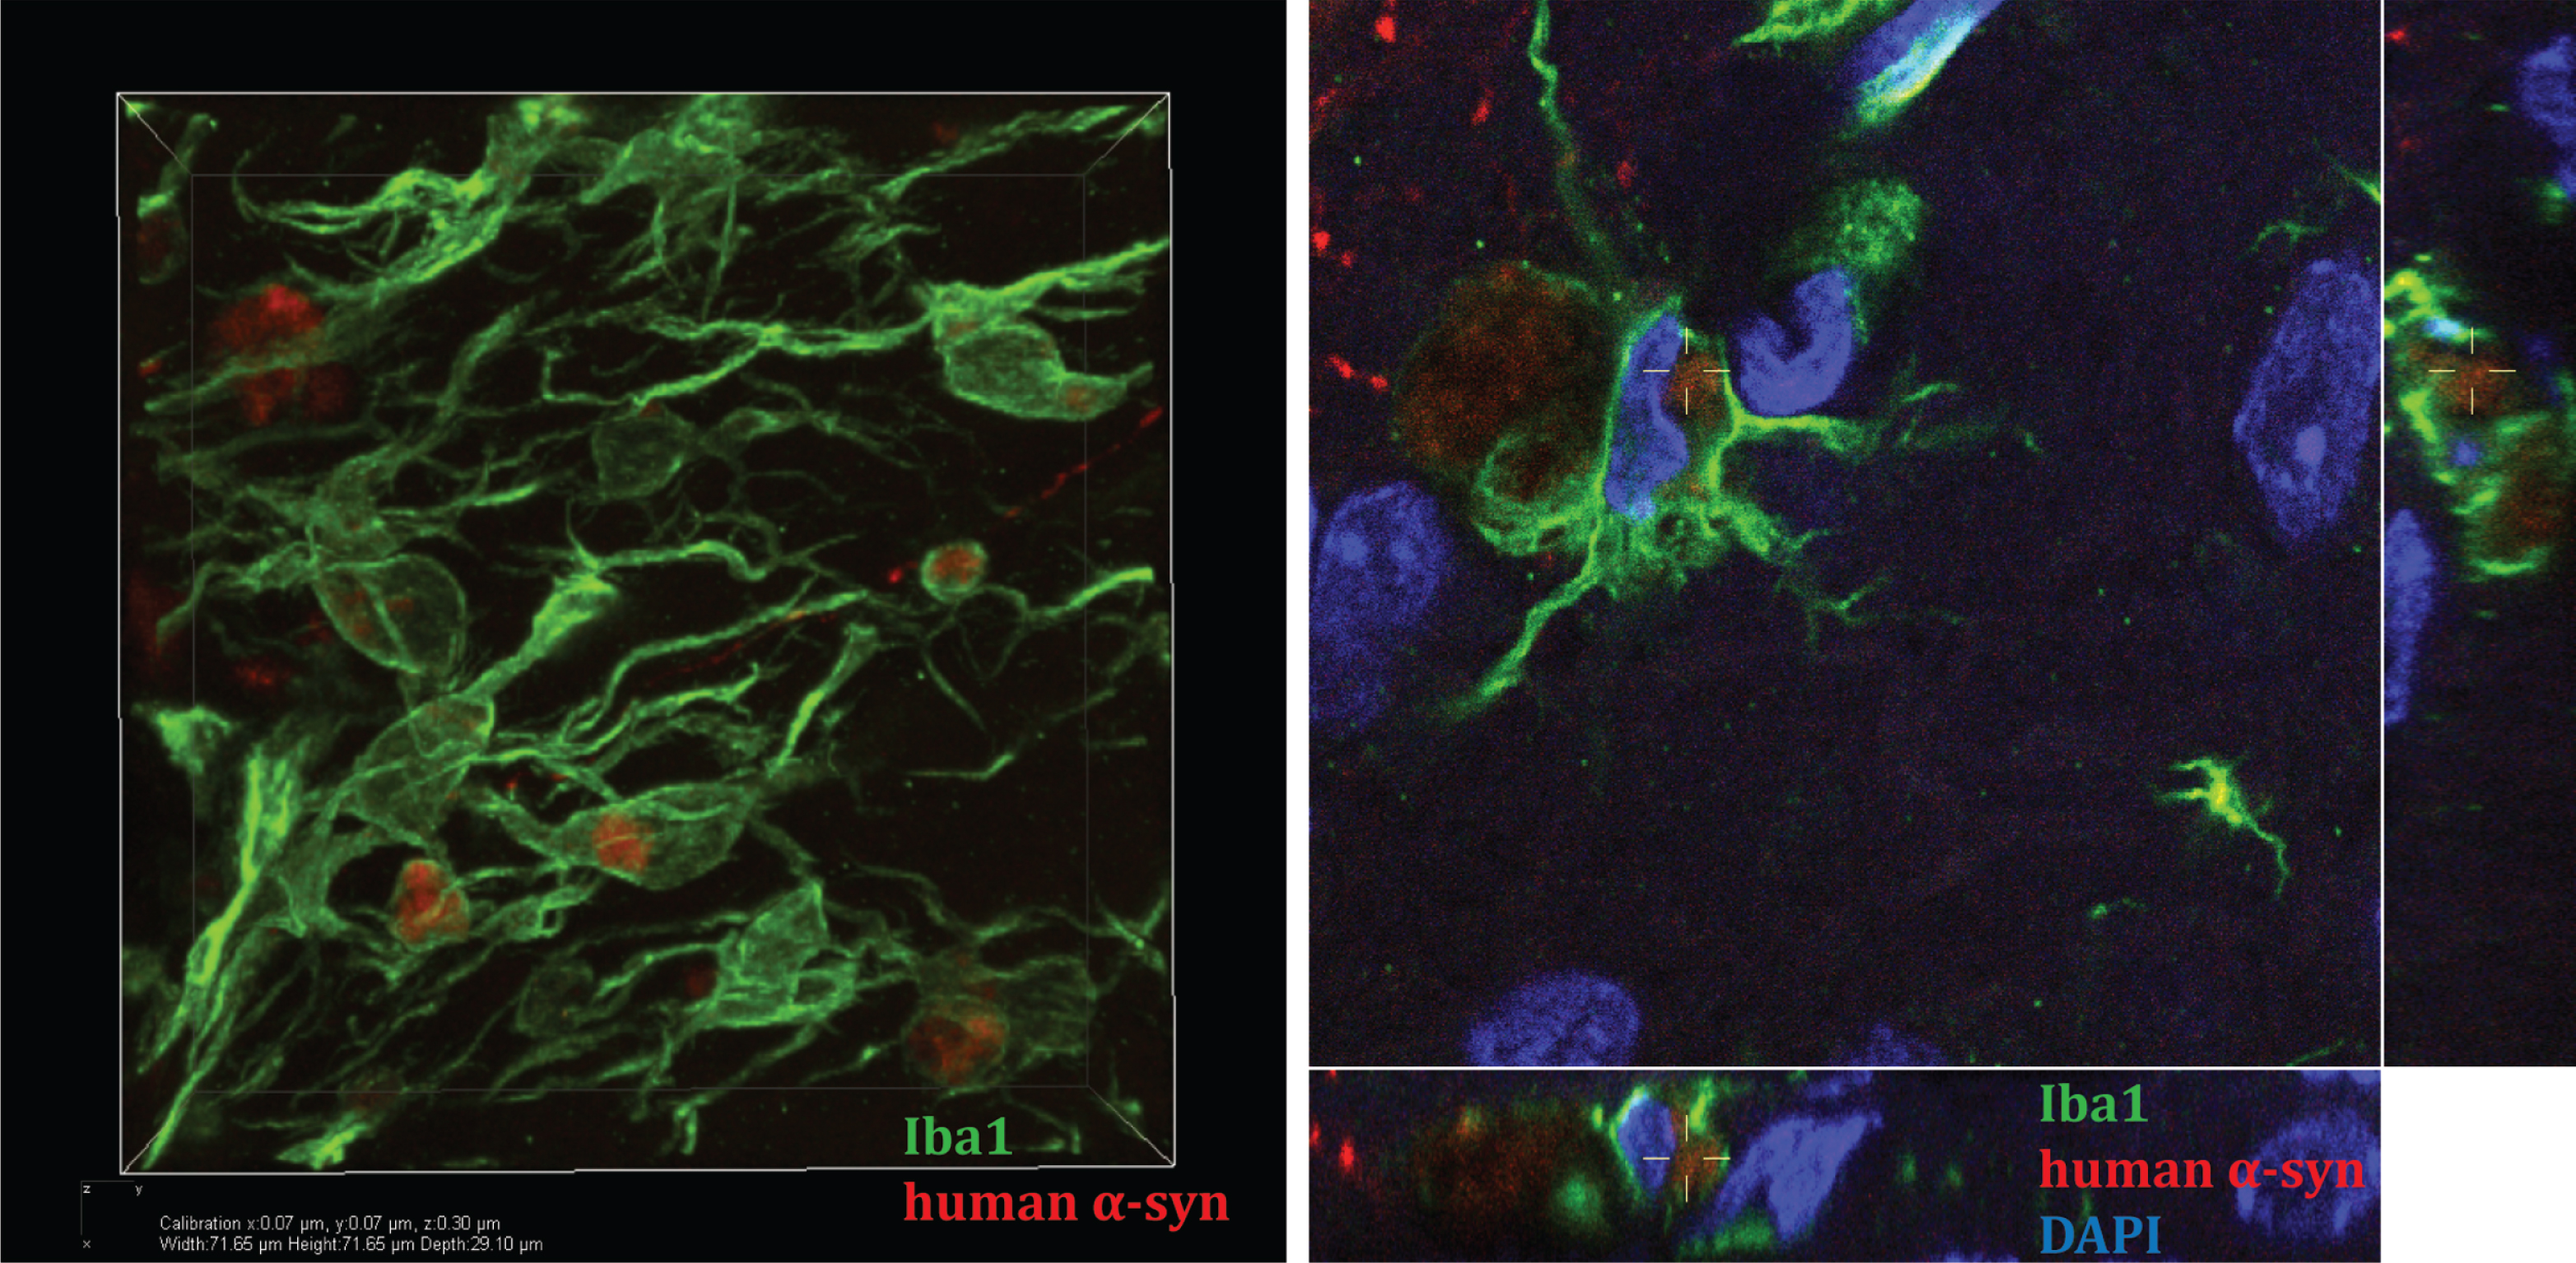 Microglia take up human α-syn in mouse striatum in an in vivo model of α-syn cell-to-cell transfer. A. Confocal three-dimensional reconstruction of microglia (Iba1 positive, green) containing human α-syn (red). B. Reconstructed confocal orthogonal projections are presented as viewed in the x-z (bottom) and y-z(right) planes displays a perinuclear localisation of human α-syn within-microglia (nucleus stainedblue, DAPI).